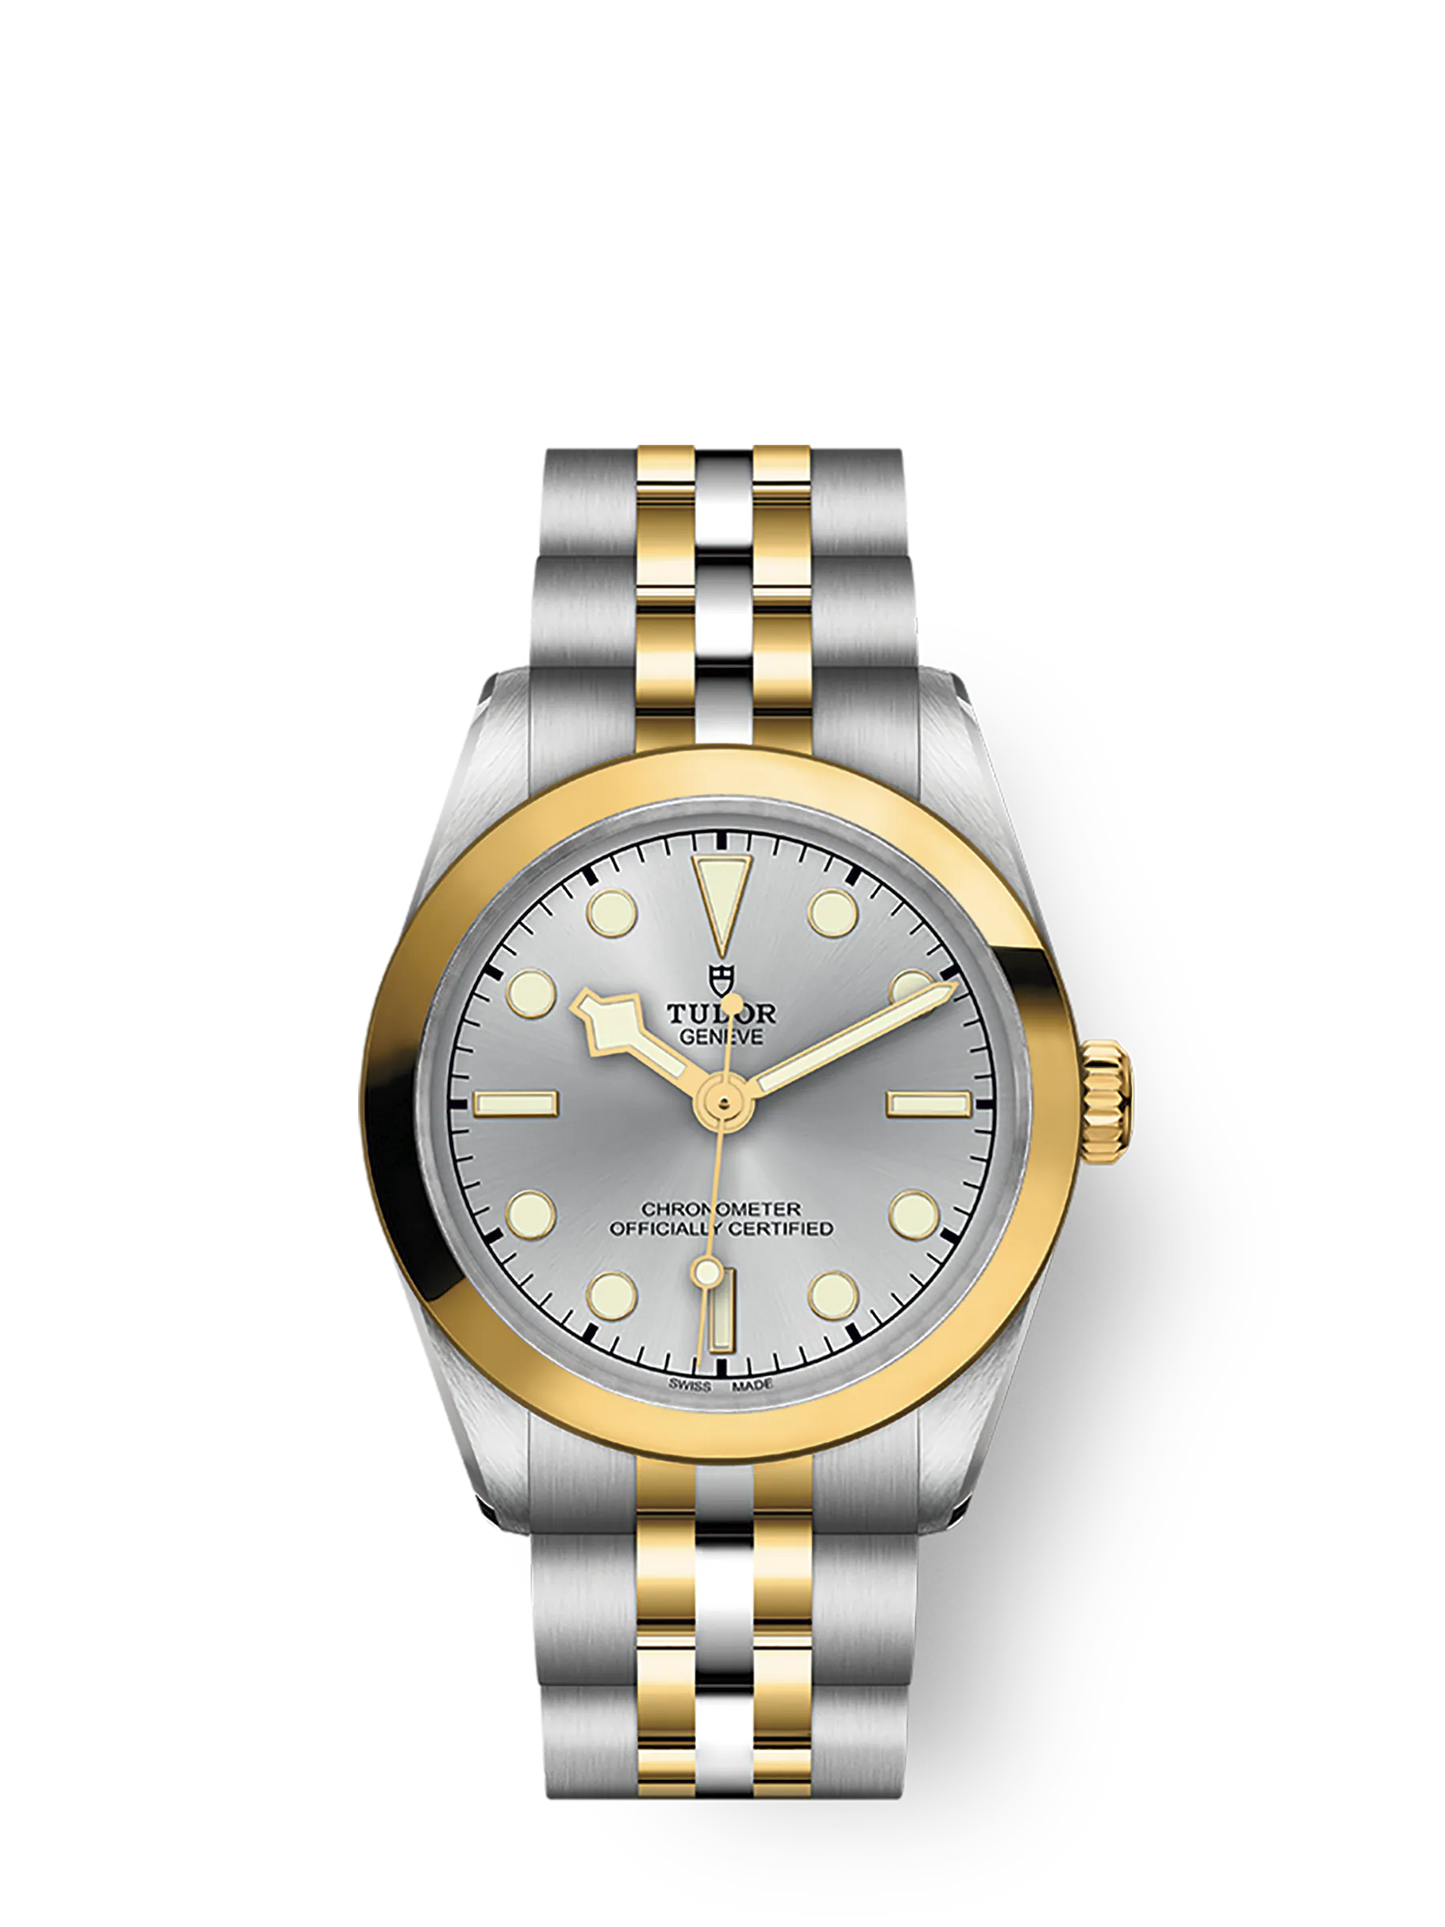 Tudor Black Bay 36 S&G, Stainless Steel and 18k Yellow Gold, Ref# M79643-0002